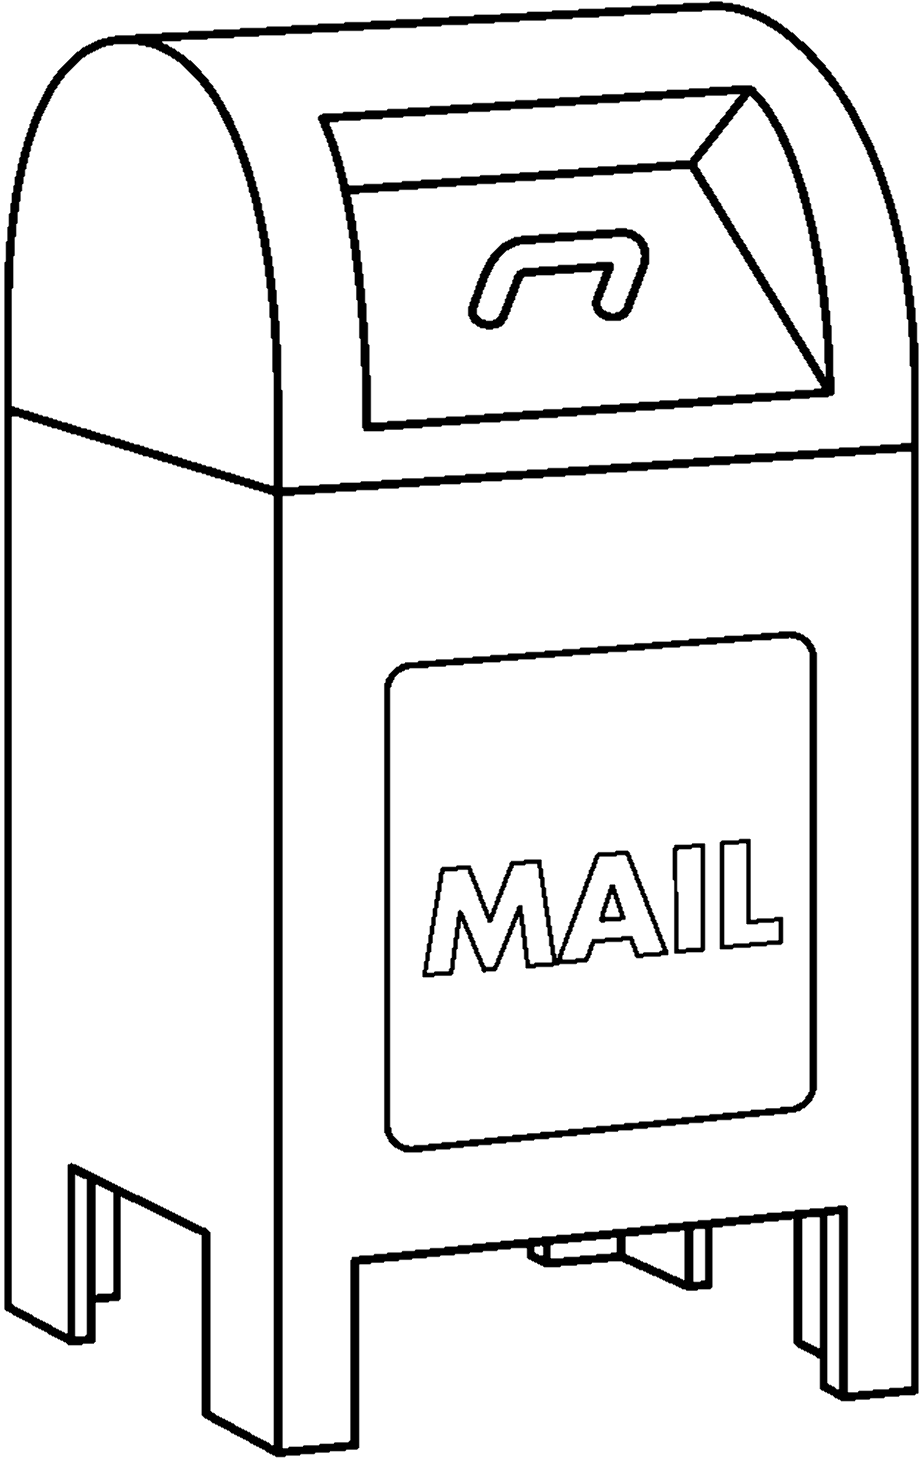 Download High Quality mailbox clipart outline Transparent PNG Images